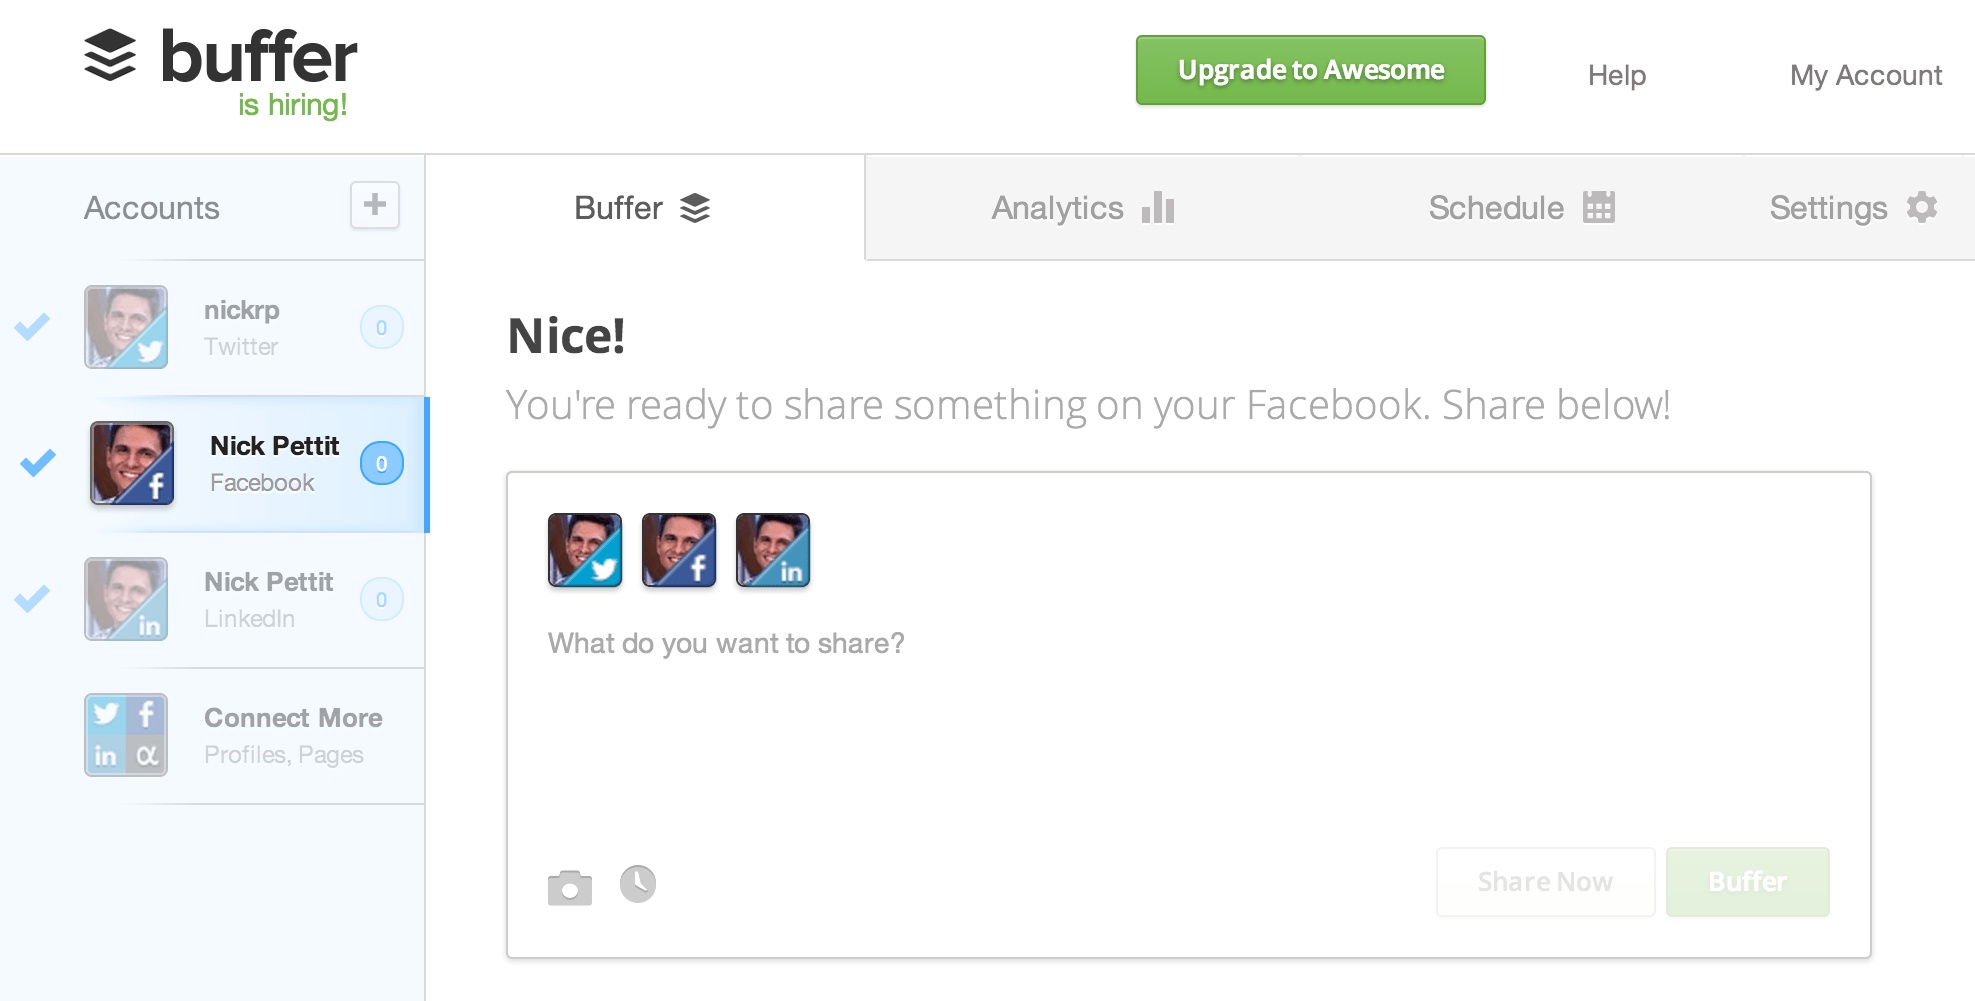 Buffer is an app that allows you to schedule upcoming social media updates. If you don't have any updates in your queue, Buffer makes it easy to add new ones immediately.